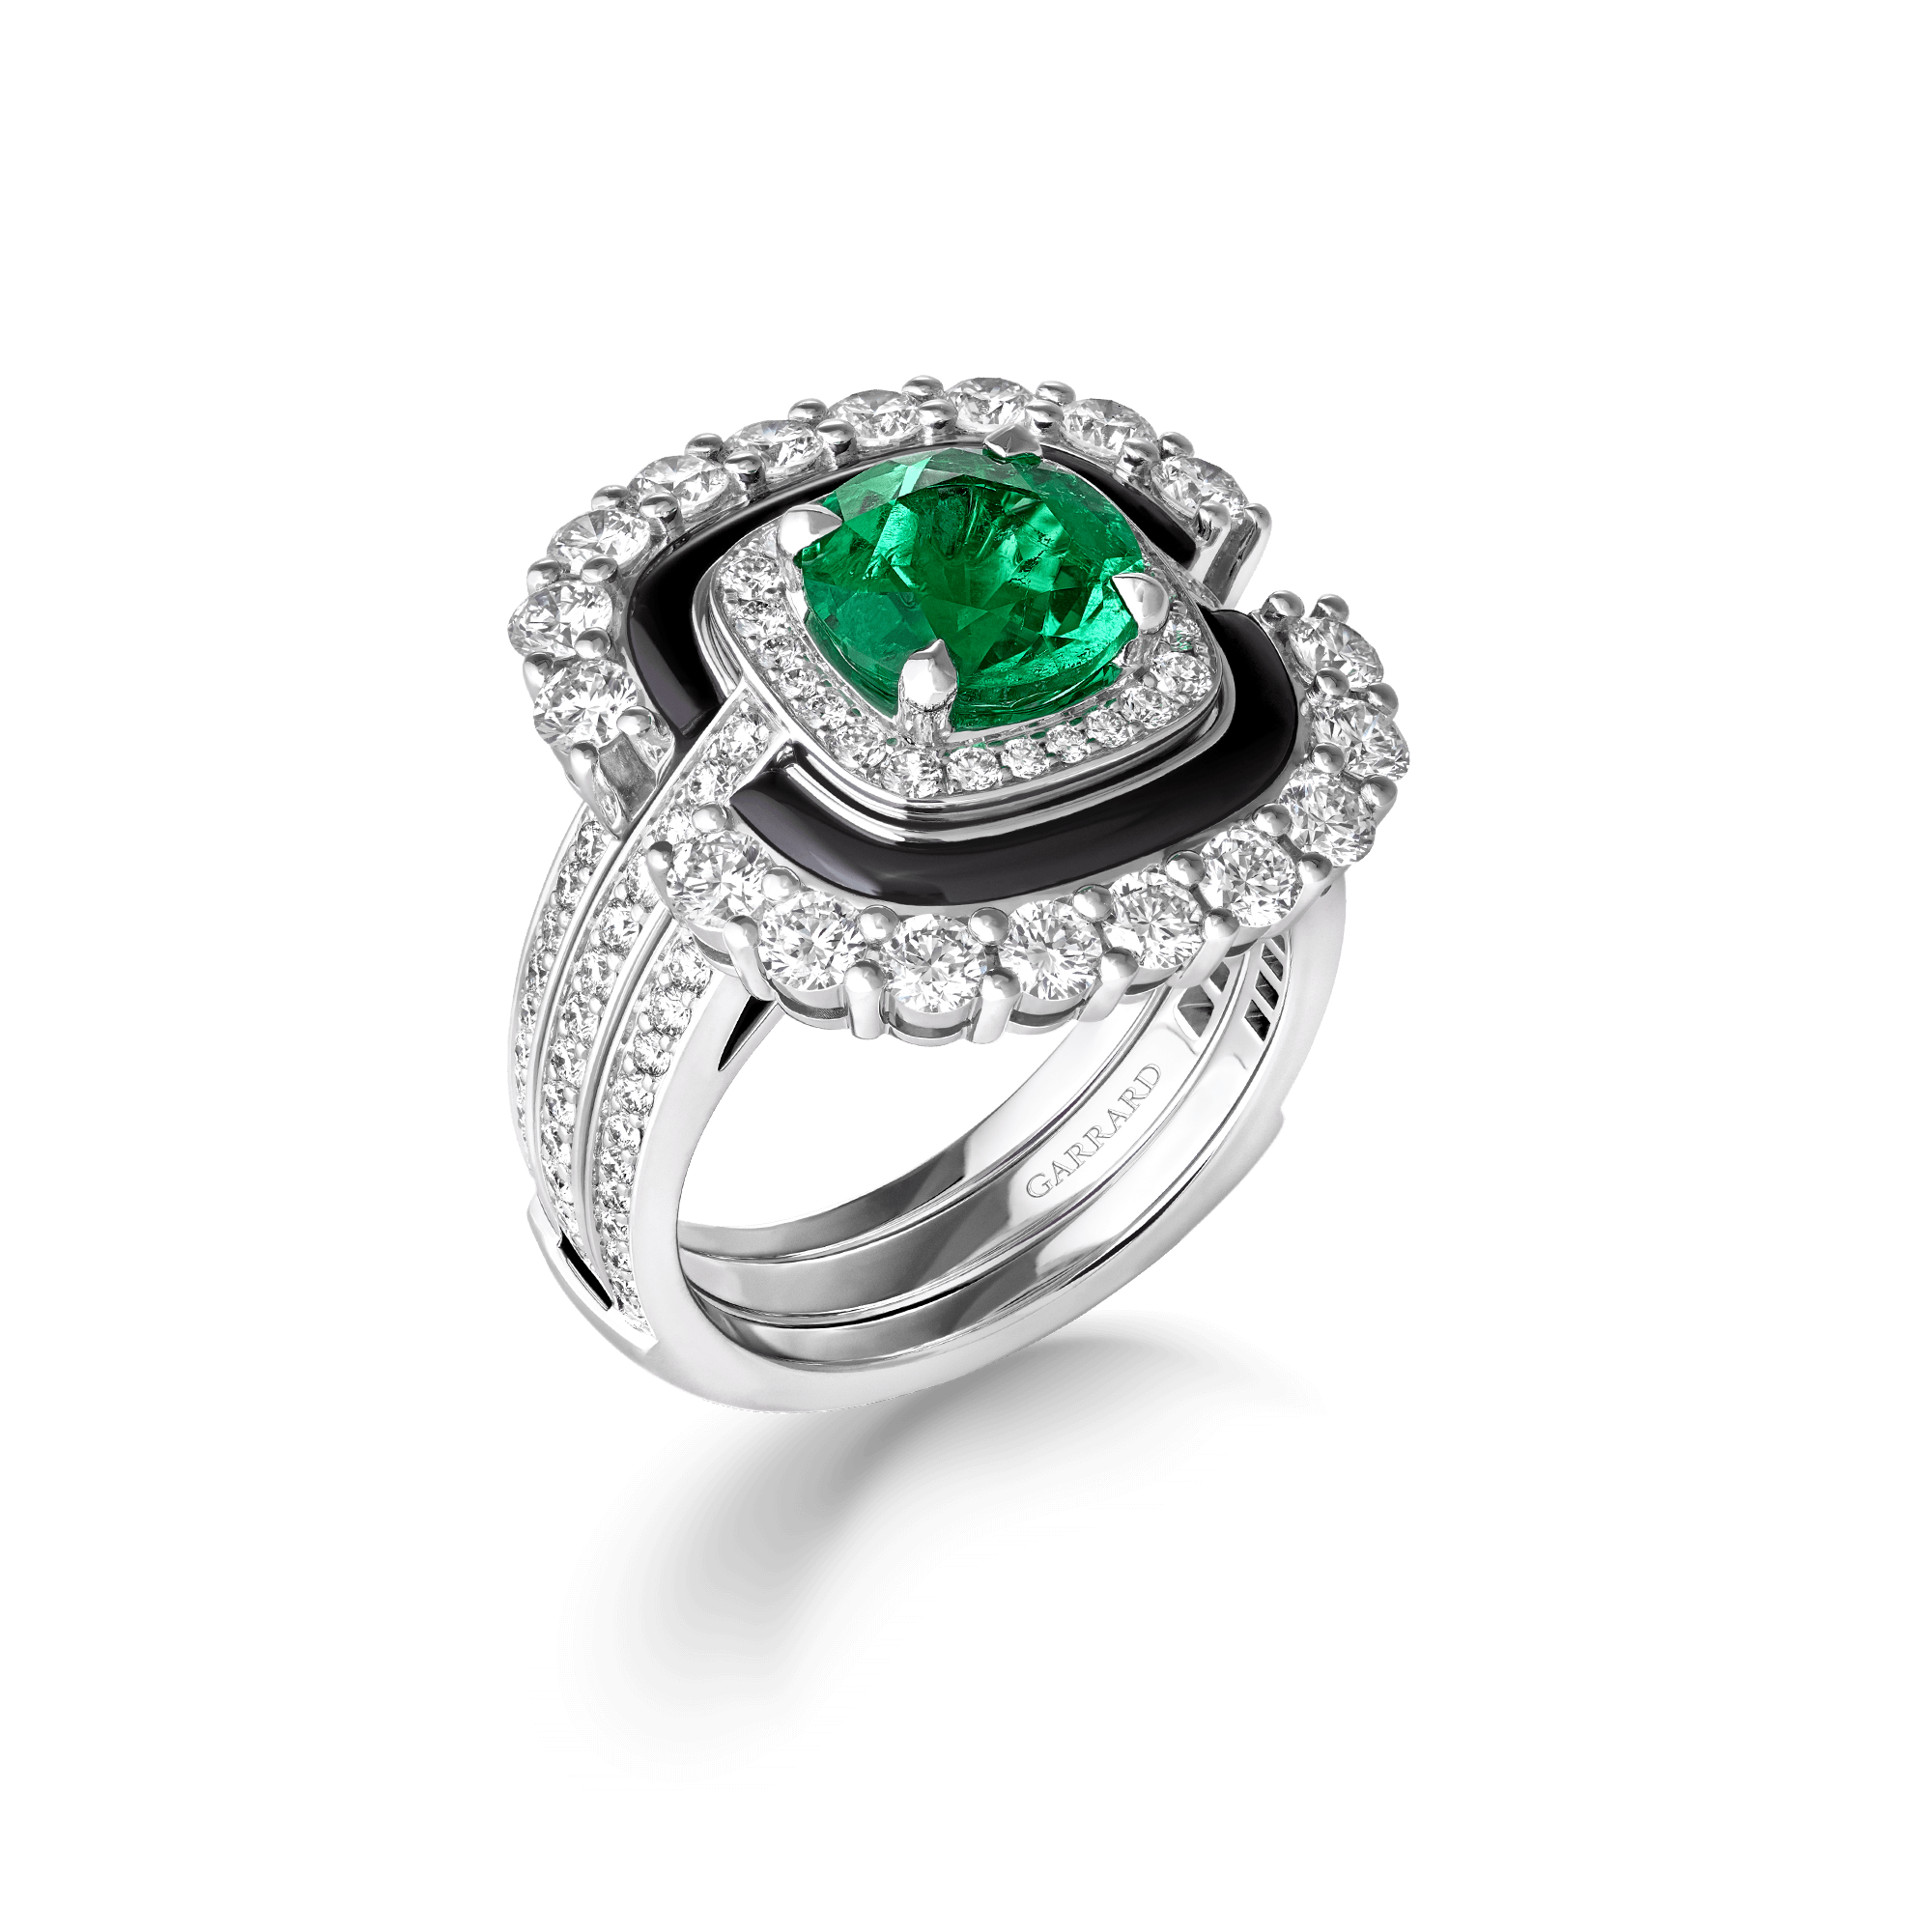 Garrard Jewelled Vault 2.21ct Round Emerald Black Spinel and Diamond Ring In 18ct White Gold 2018515